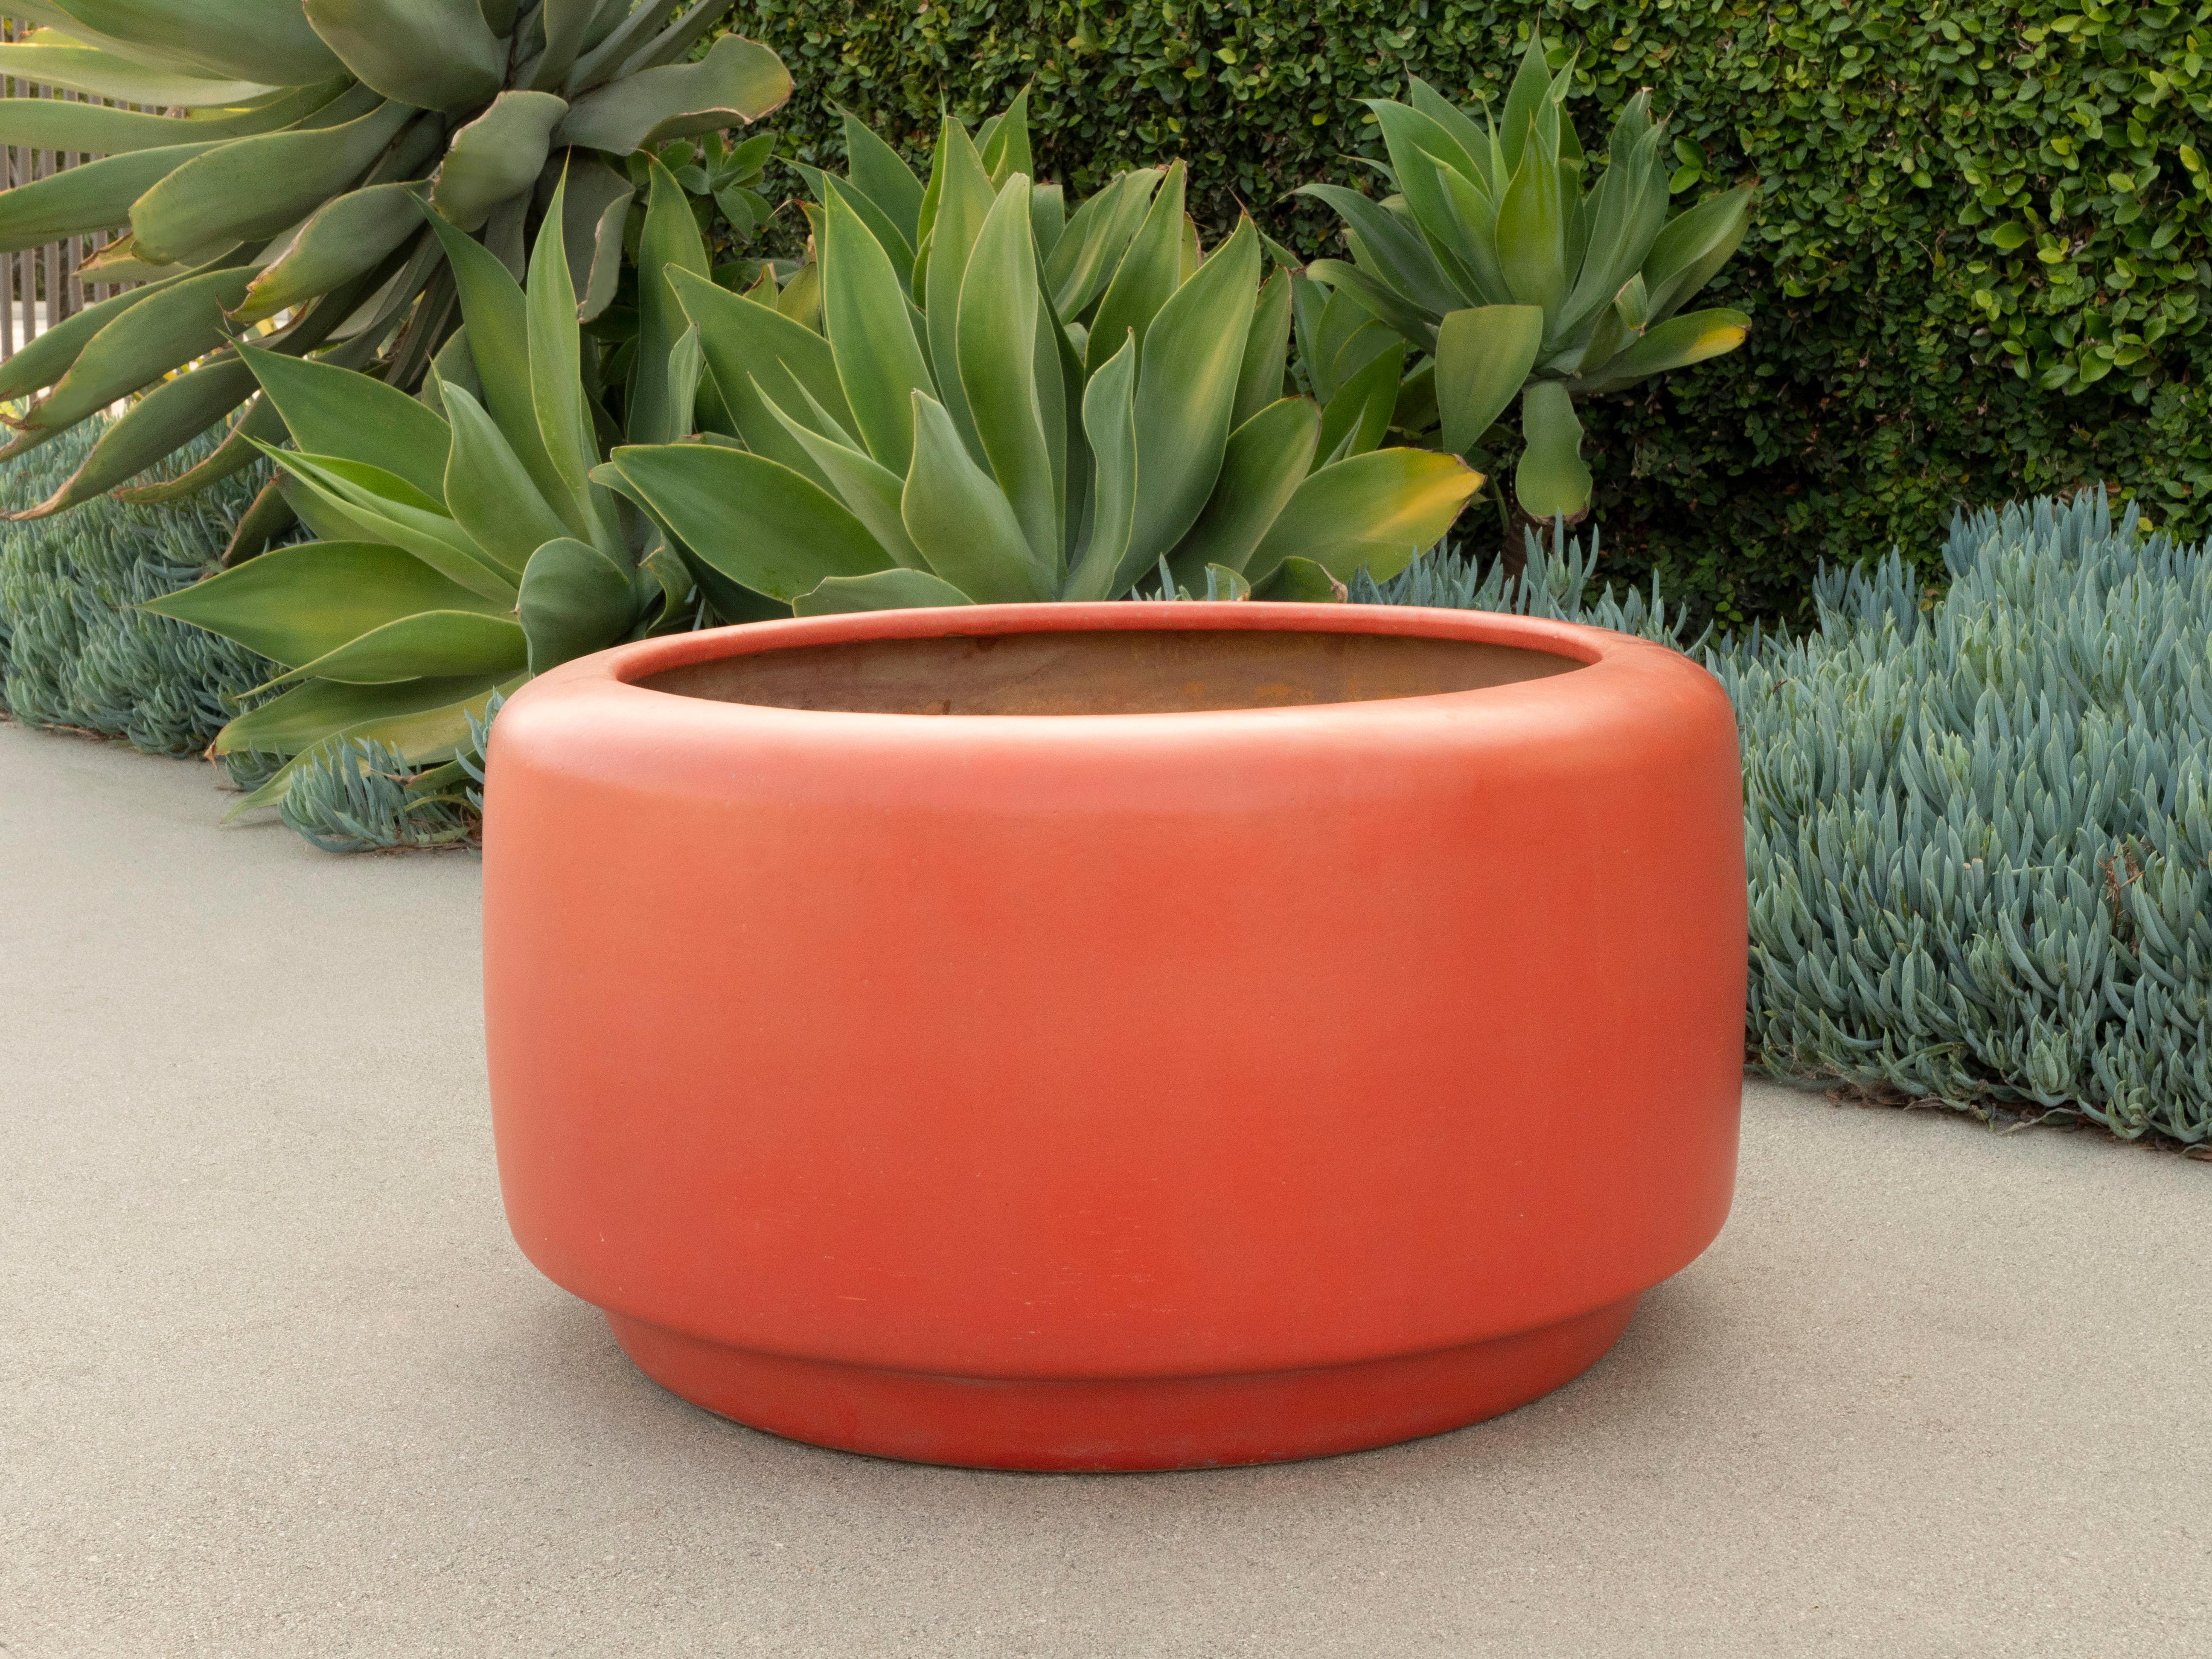 Mid-Century Modern planter by designer John Follis for Architectural Pottery. Known as the 